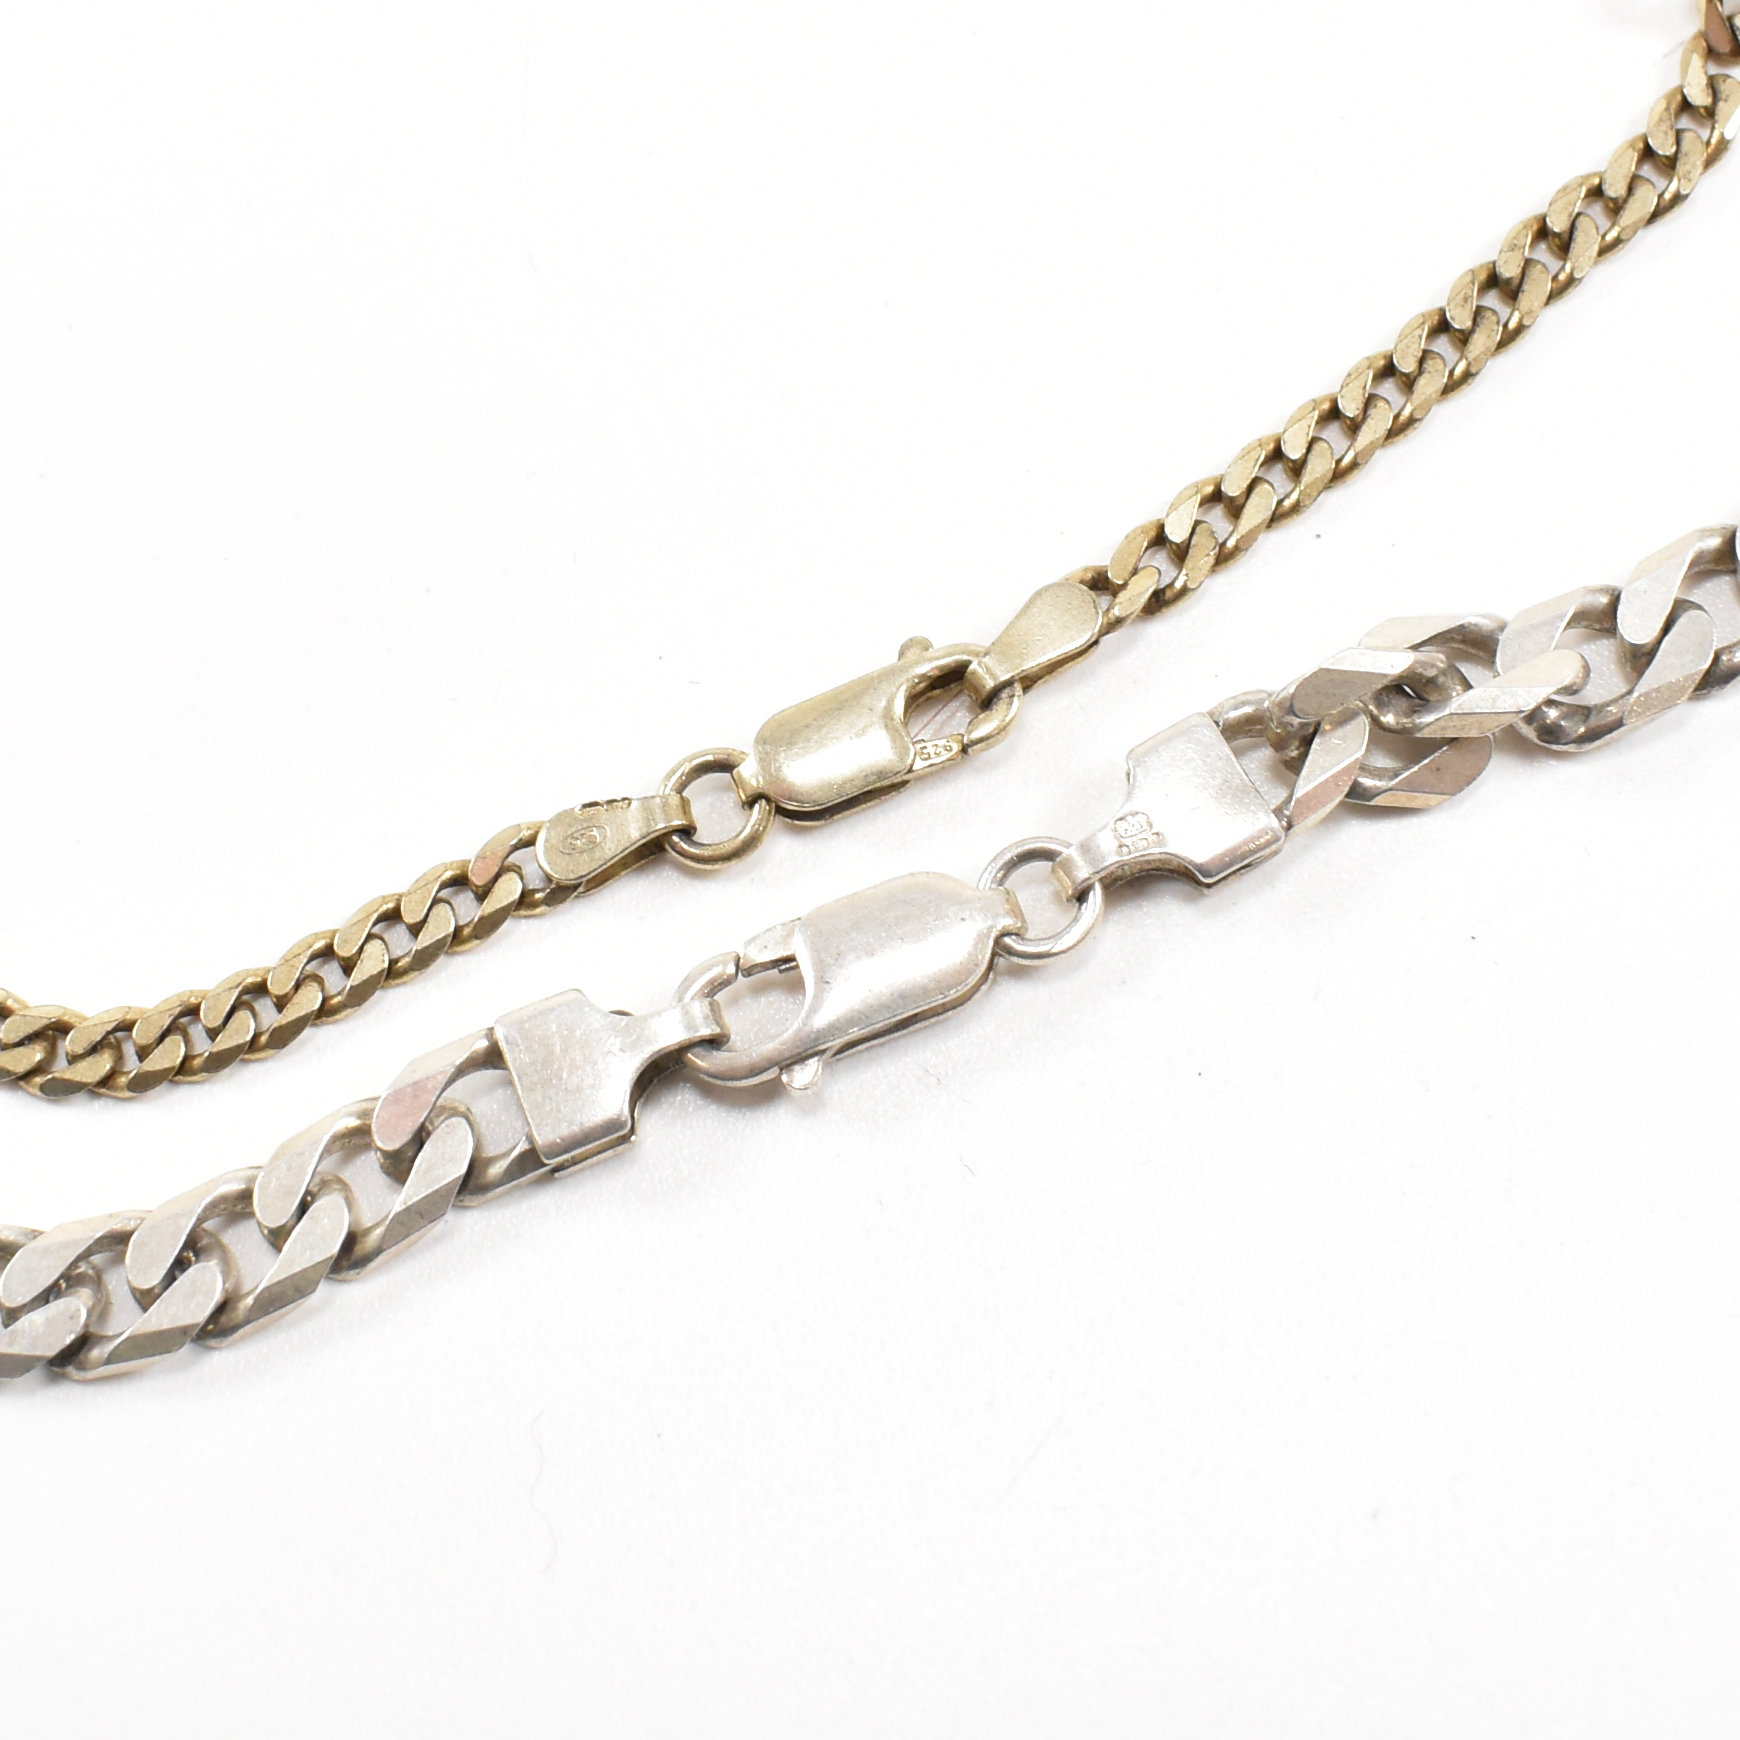 TWO HALLMARKED 925 SILVER CHAIN LINK NECKLACES - Image 3 of 6